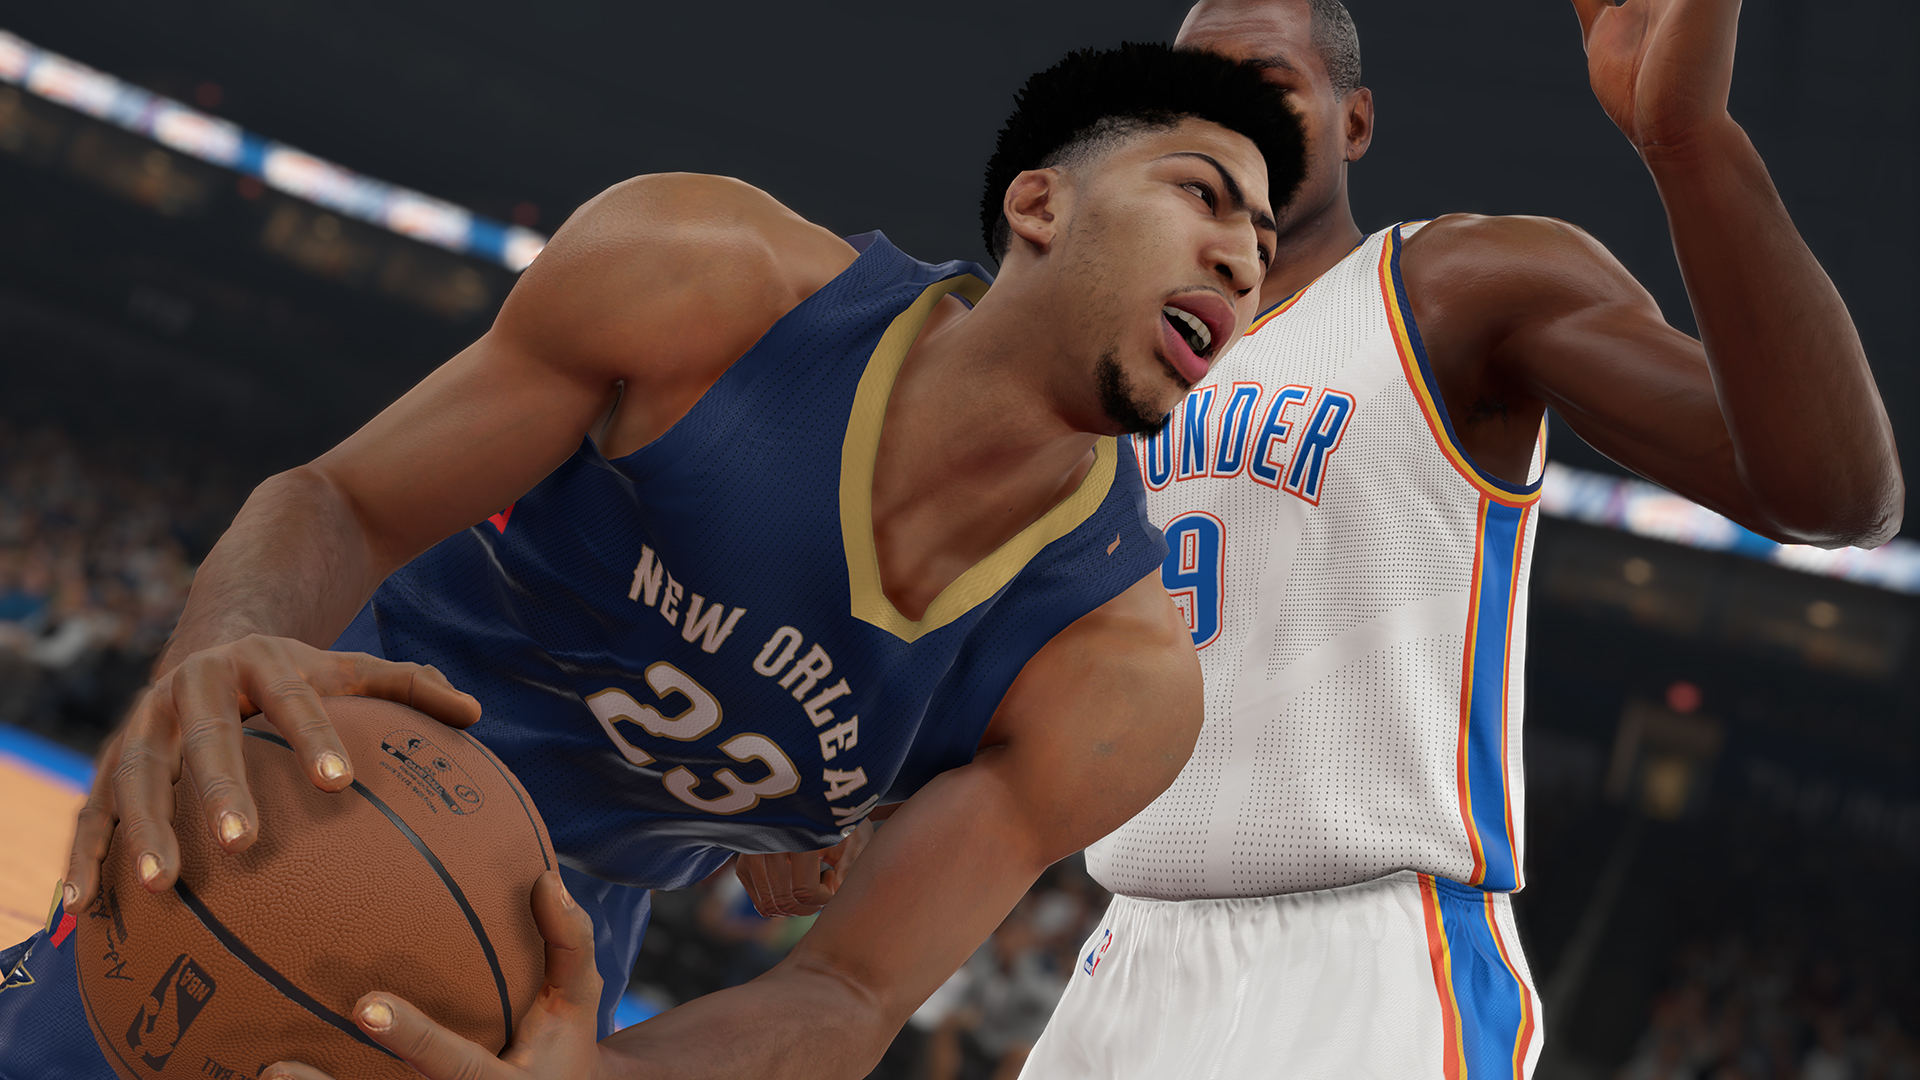 Xbox Live Gold Members Can Play NBA 2K15 Free This Weekend on Xbox One